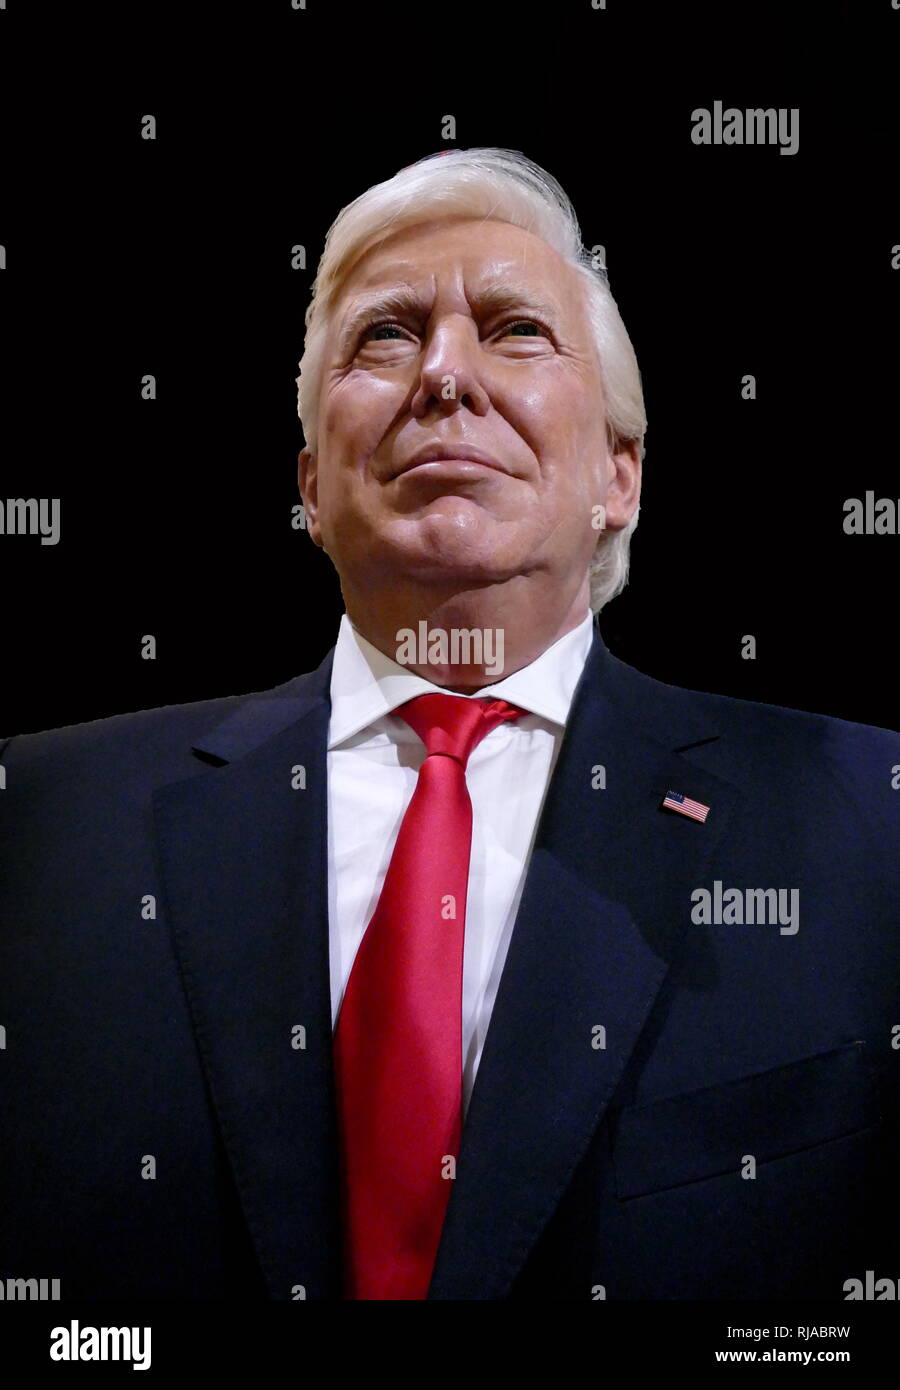 Waxwork figure of Donald John Trump (born 1946); President of the United States, since January 20, 2017. Before entering politics, he was a businessman and television personality Stock Photo